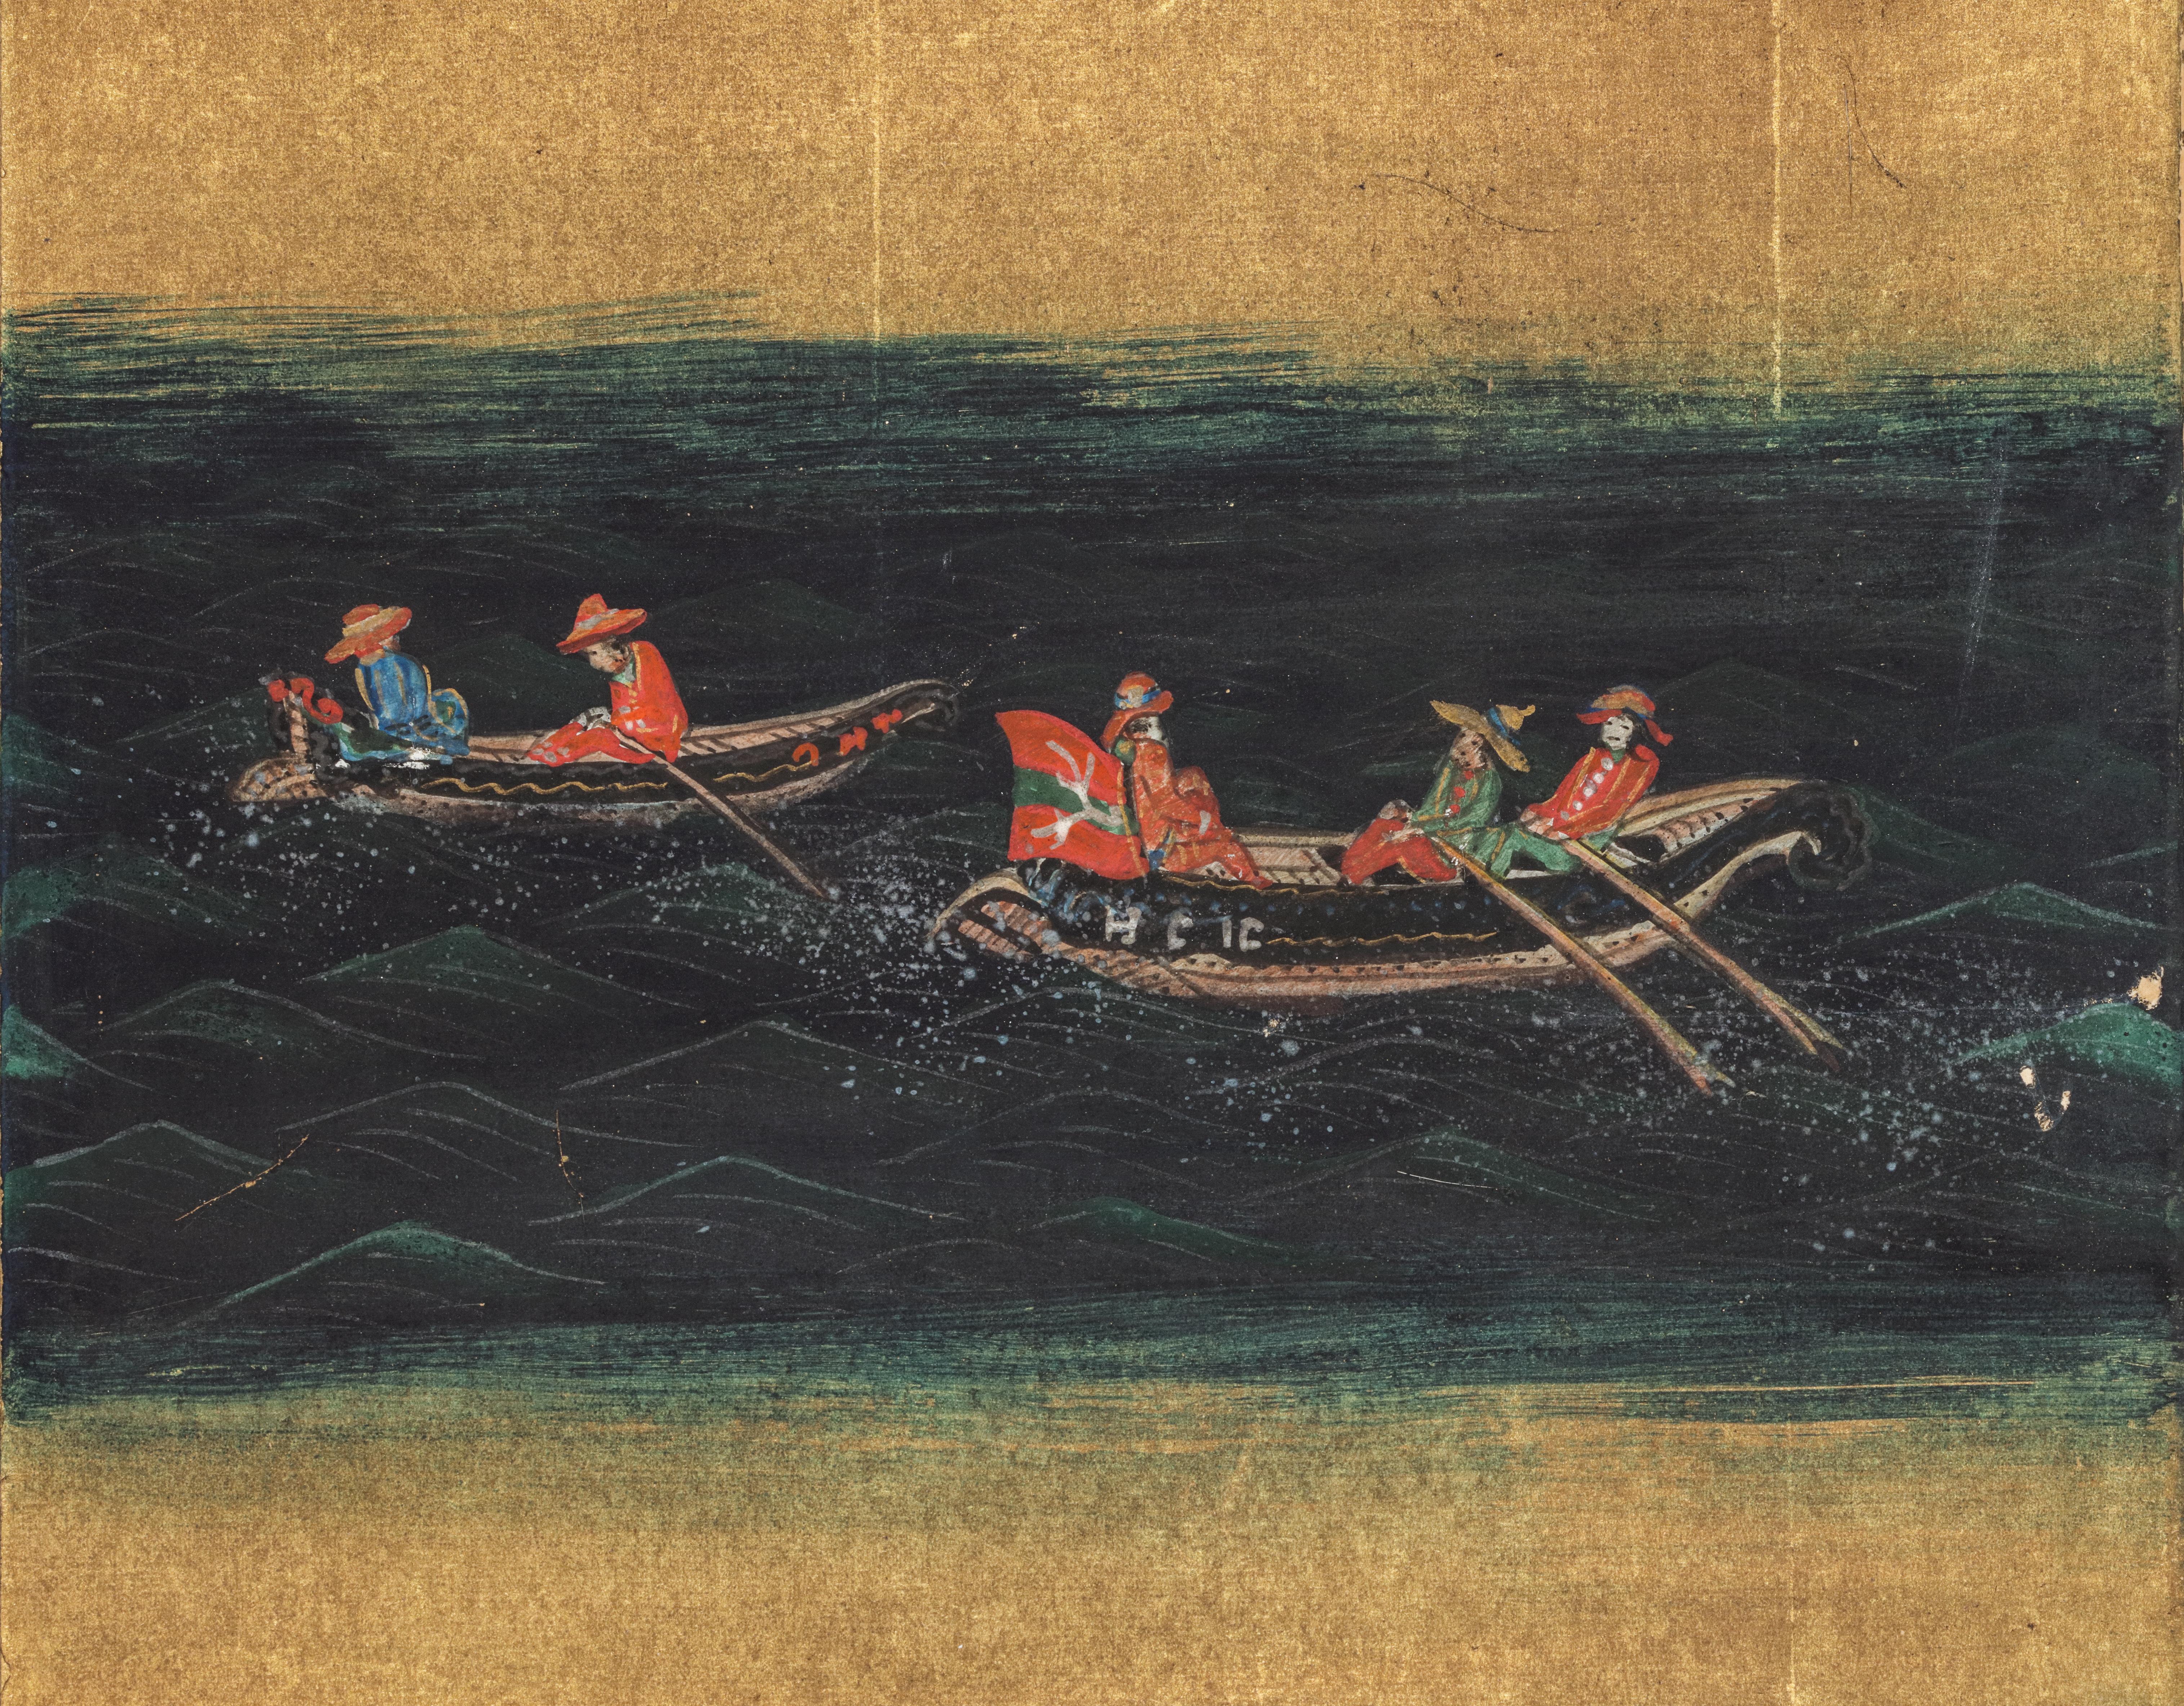 A rare and fine Japanese six-fold gold-leaf screen with the depiction of Commodore Matthew Perry’s flagship the USS Mississippi

Early Bakumatsu period (1853-1867)

Measures: H. 61 x W. 183 cm

Provenance:
Private collection, USA

On 8 July